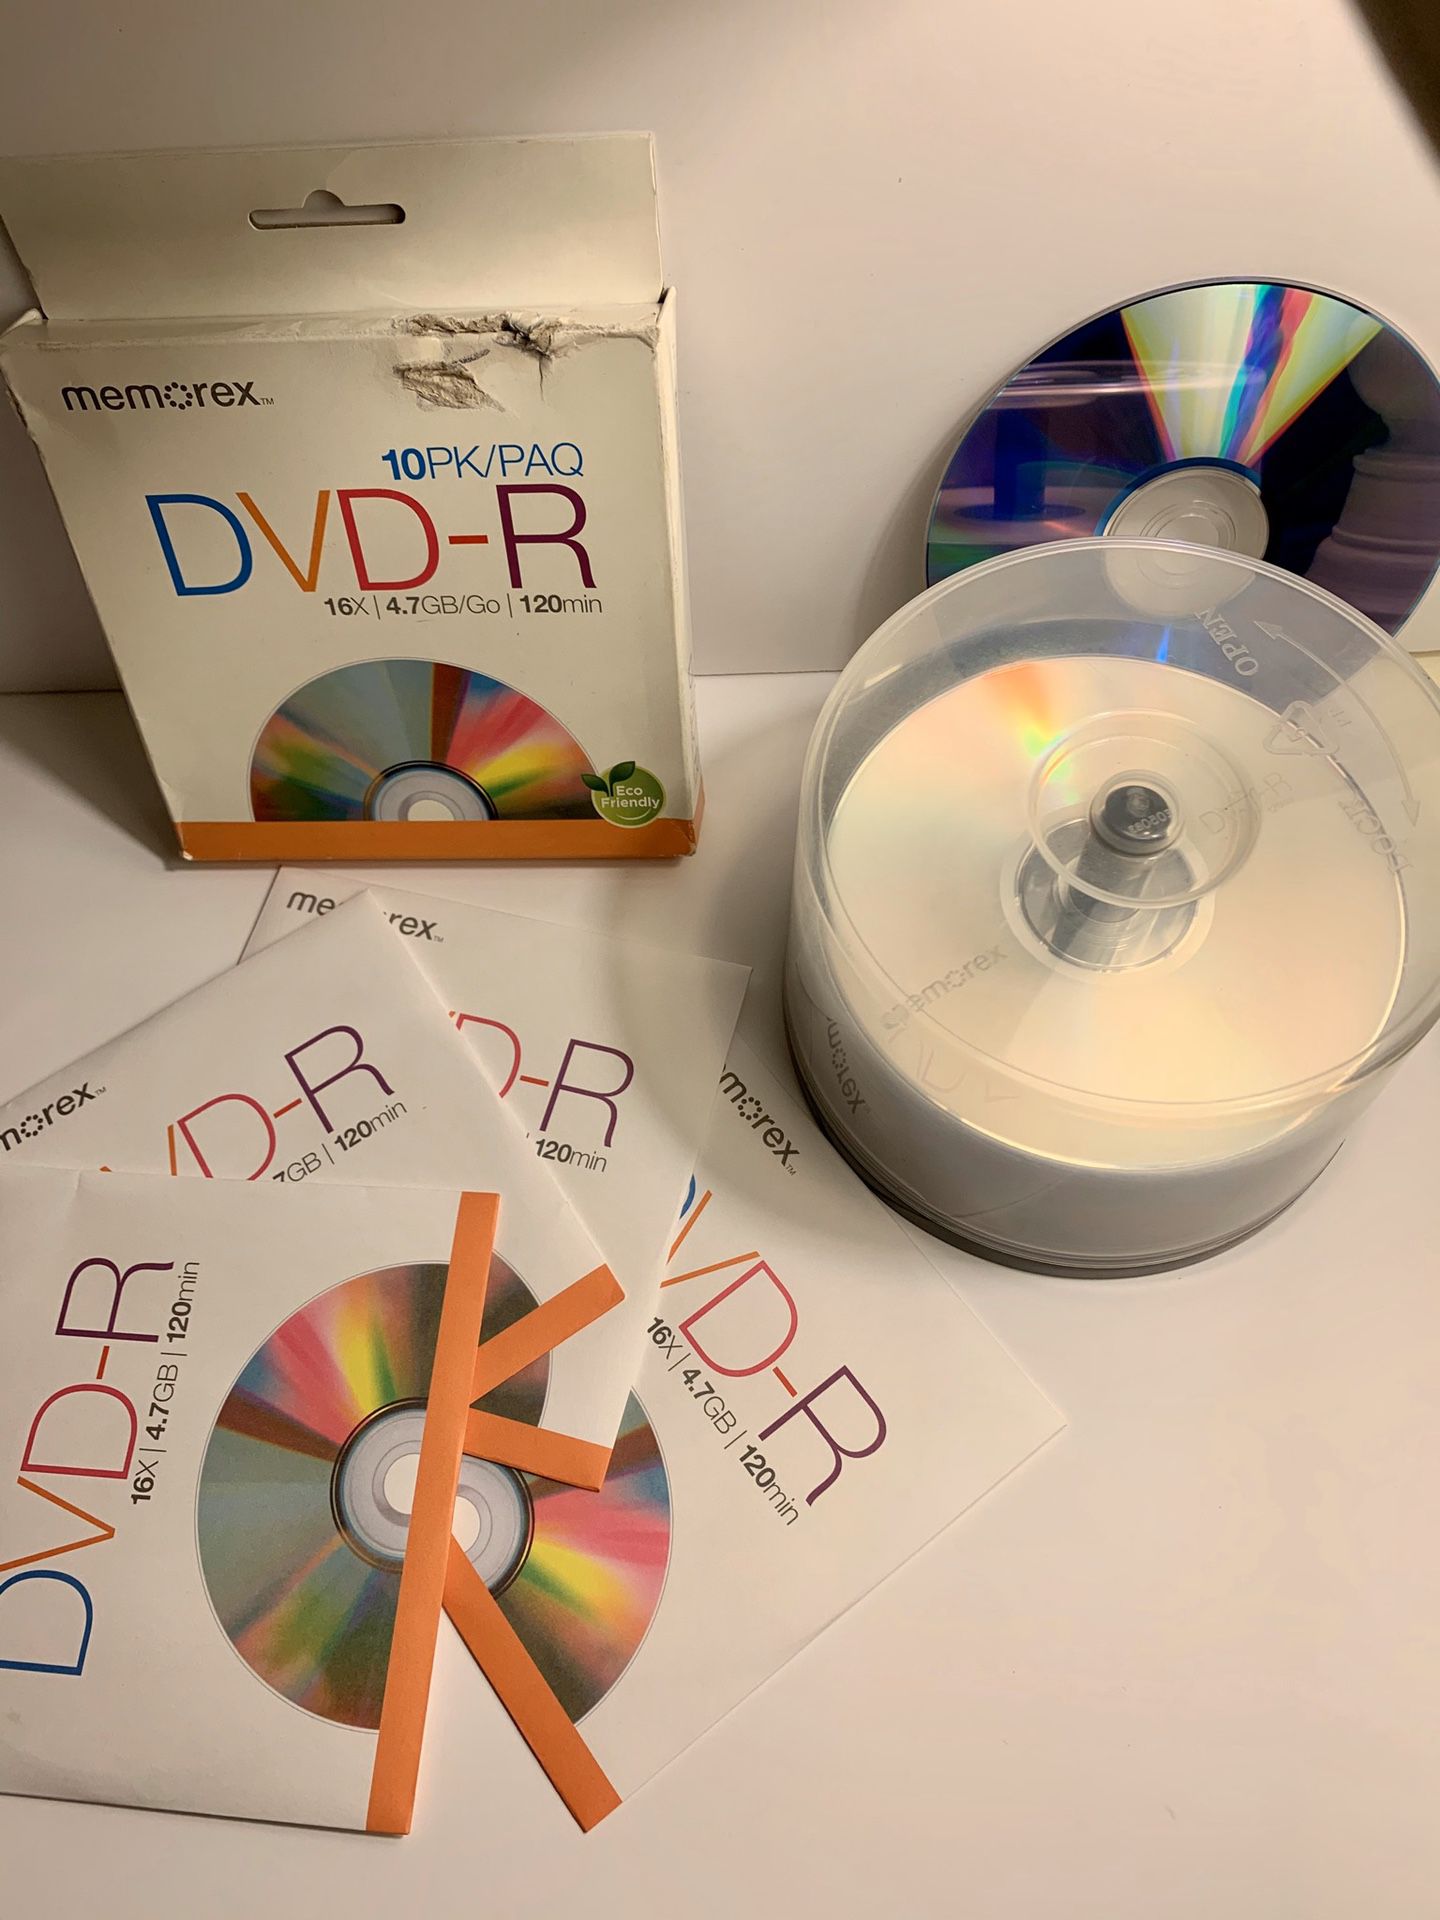 Memorex DVD-R Total of 36 new discs on Spindle 16x 4.7GB 120 Min & 10 Pack DVD-RW